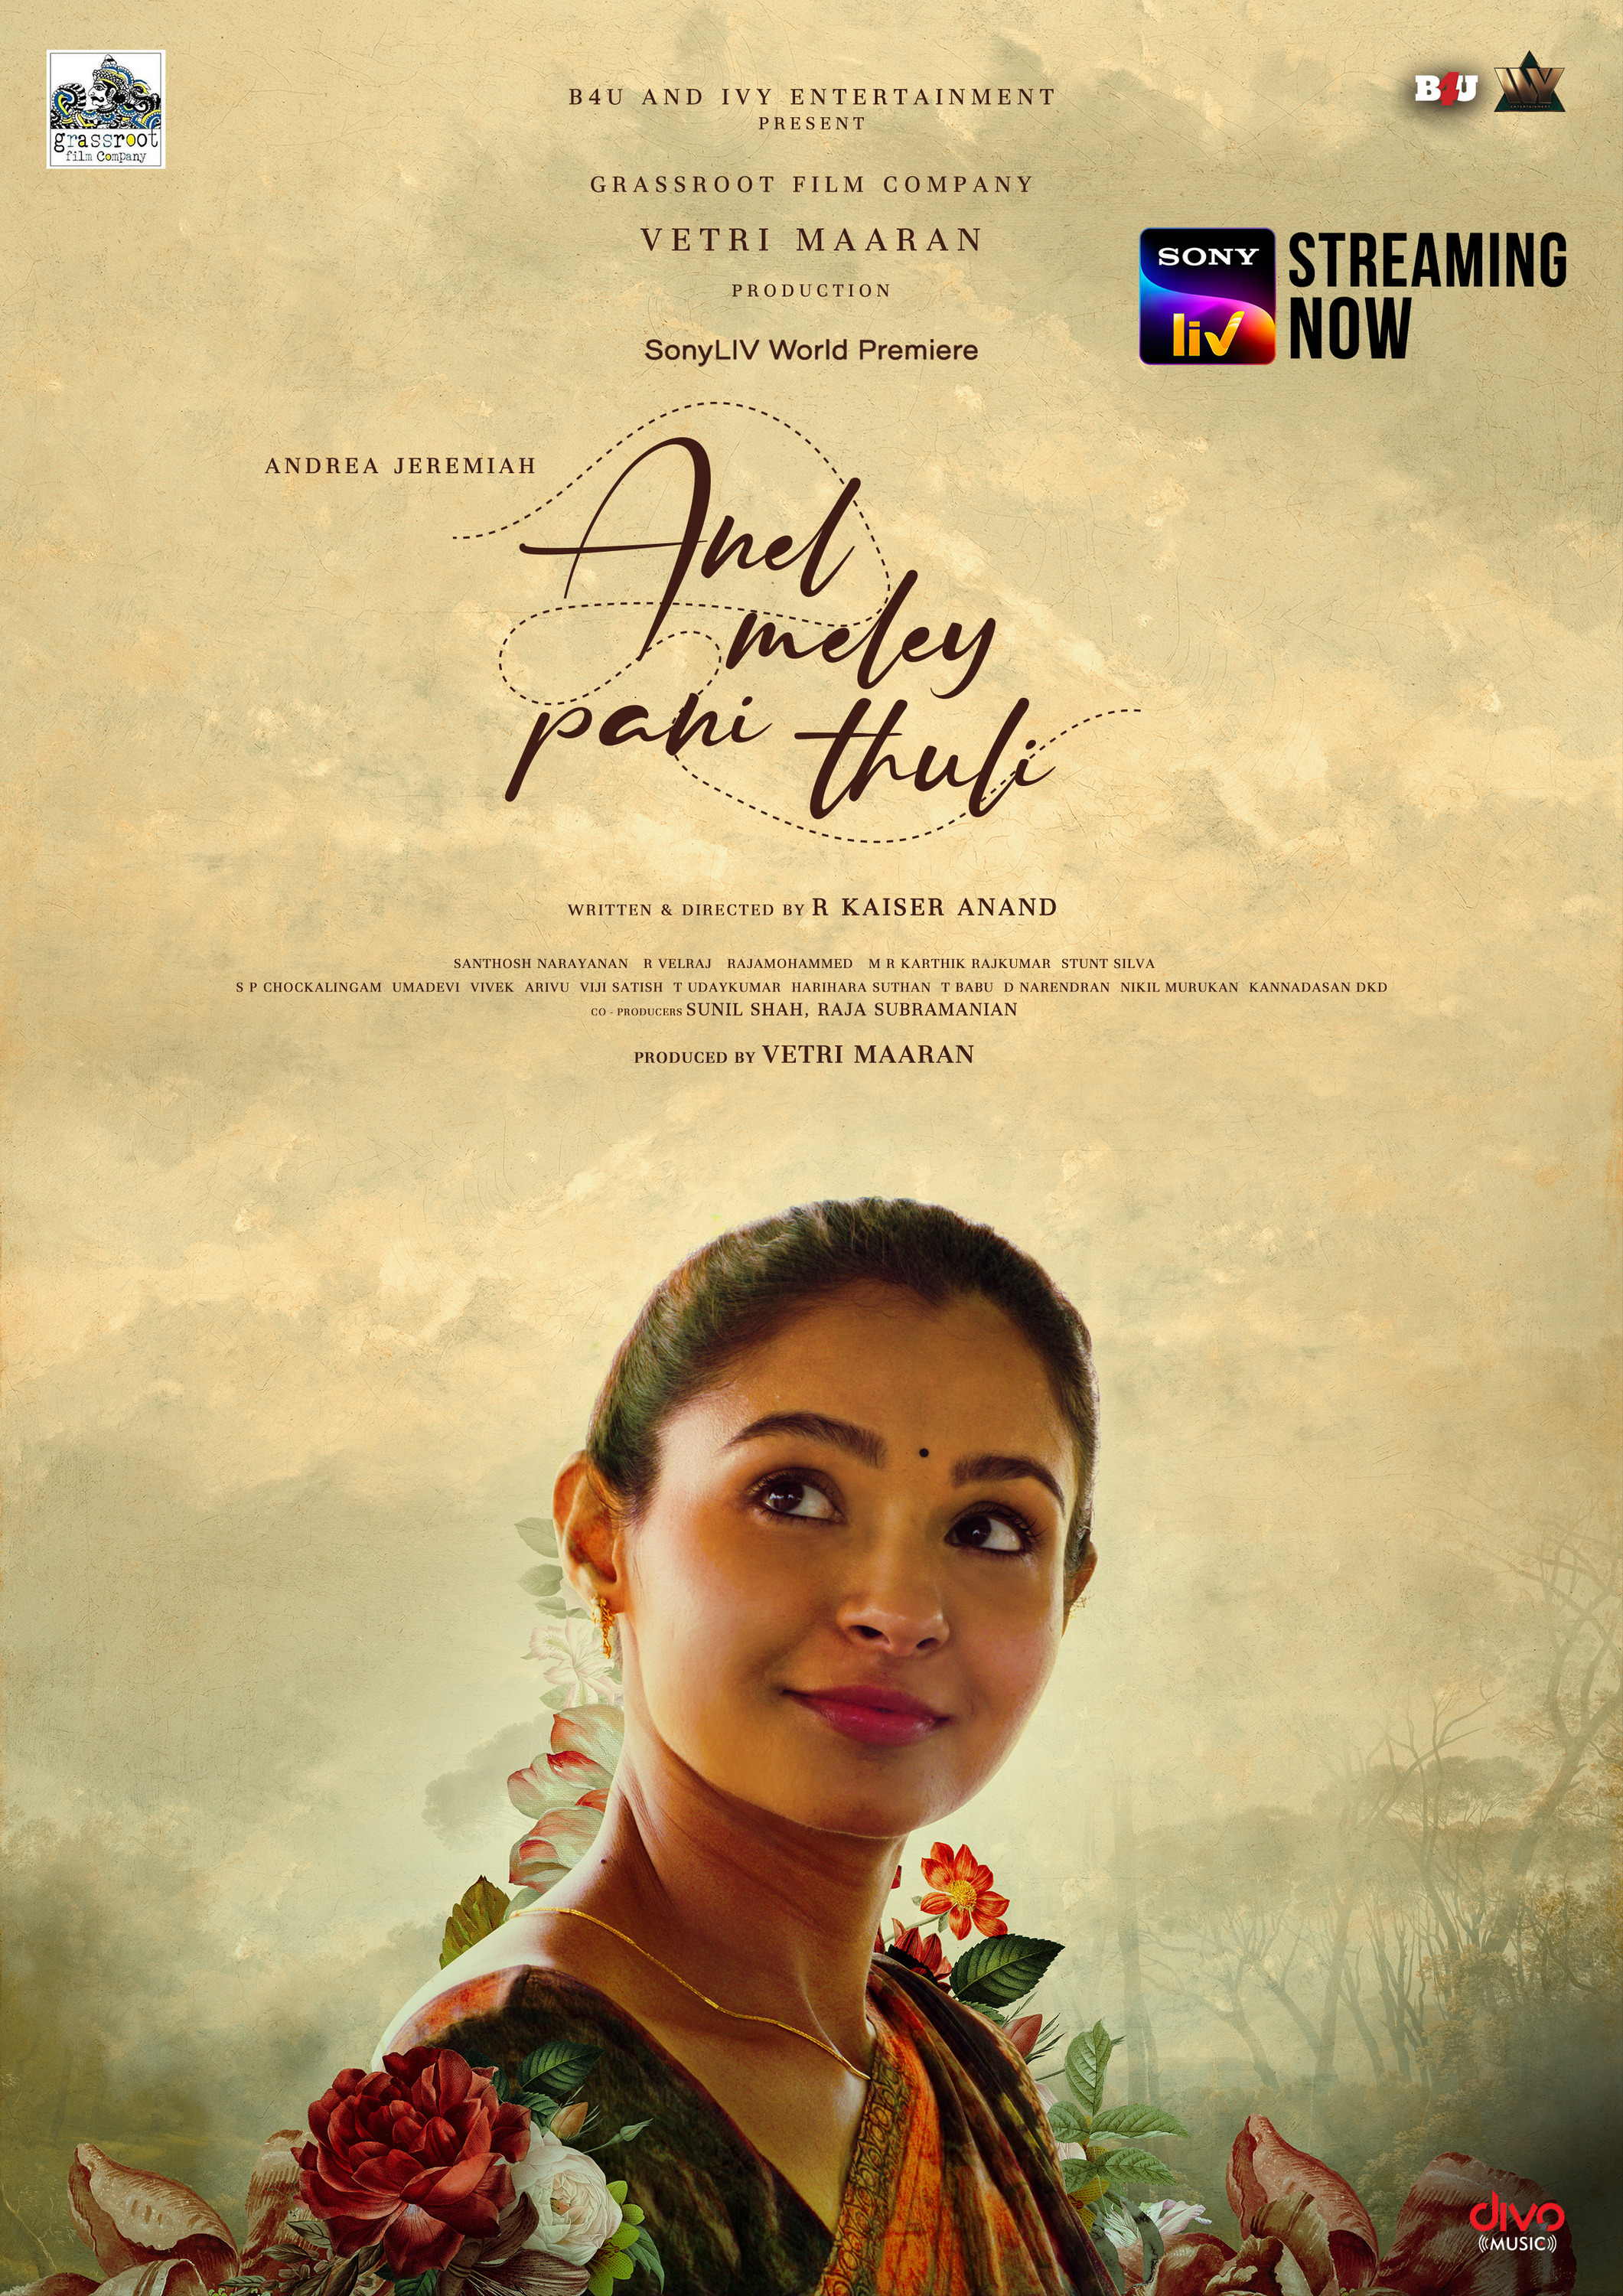 Mega Sized Movie Poster Image for Anel Meley Panithuli (#3 of 7)